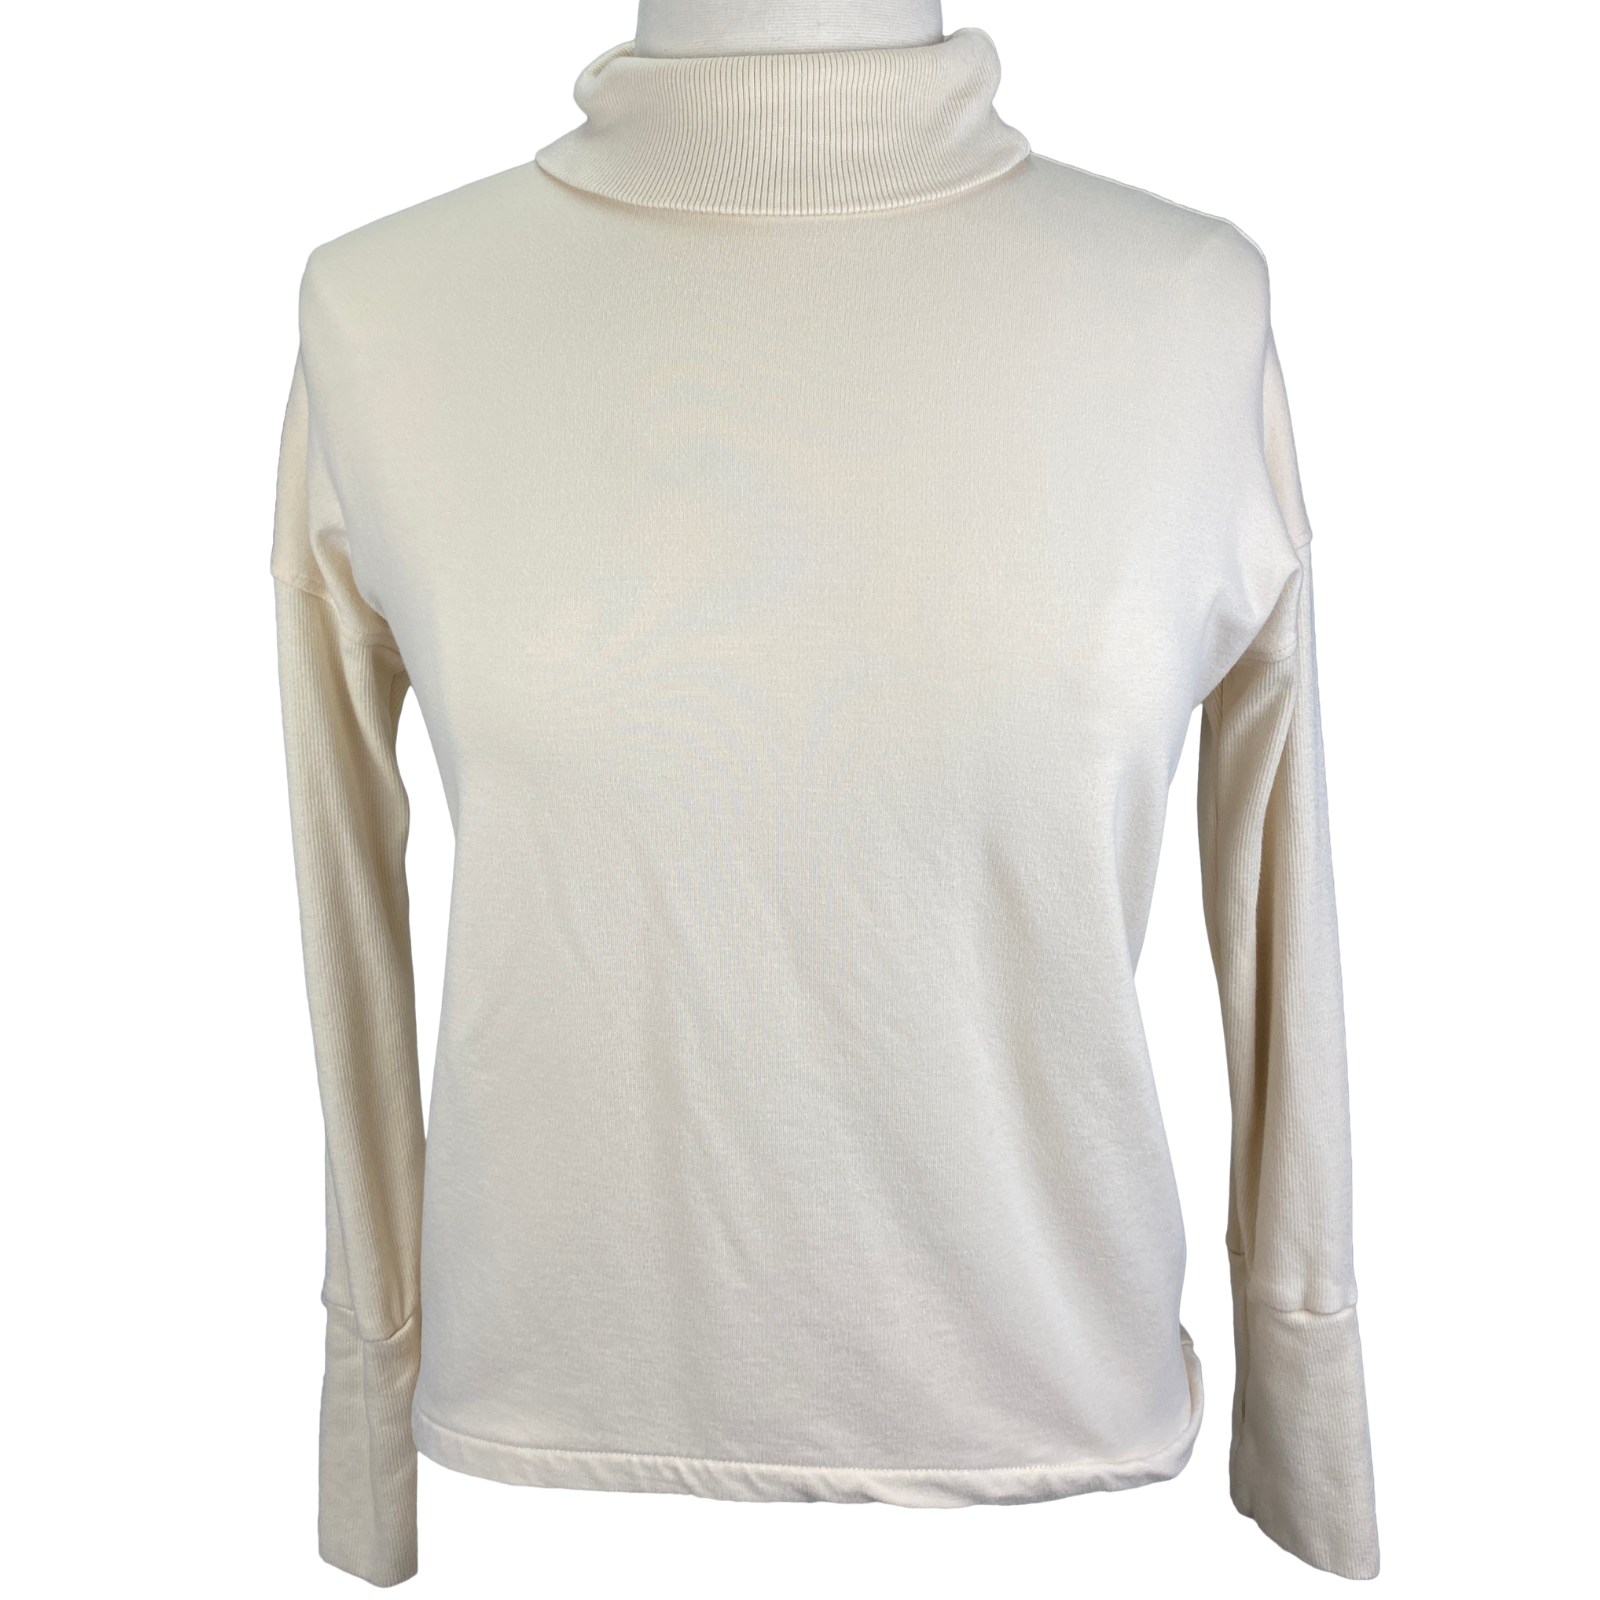 Two Bits Equestrian Bamboo Turtleneck in Cream 